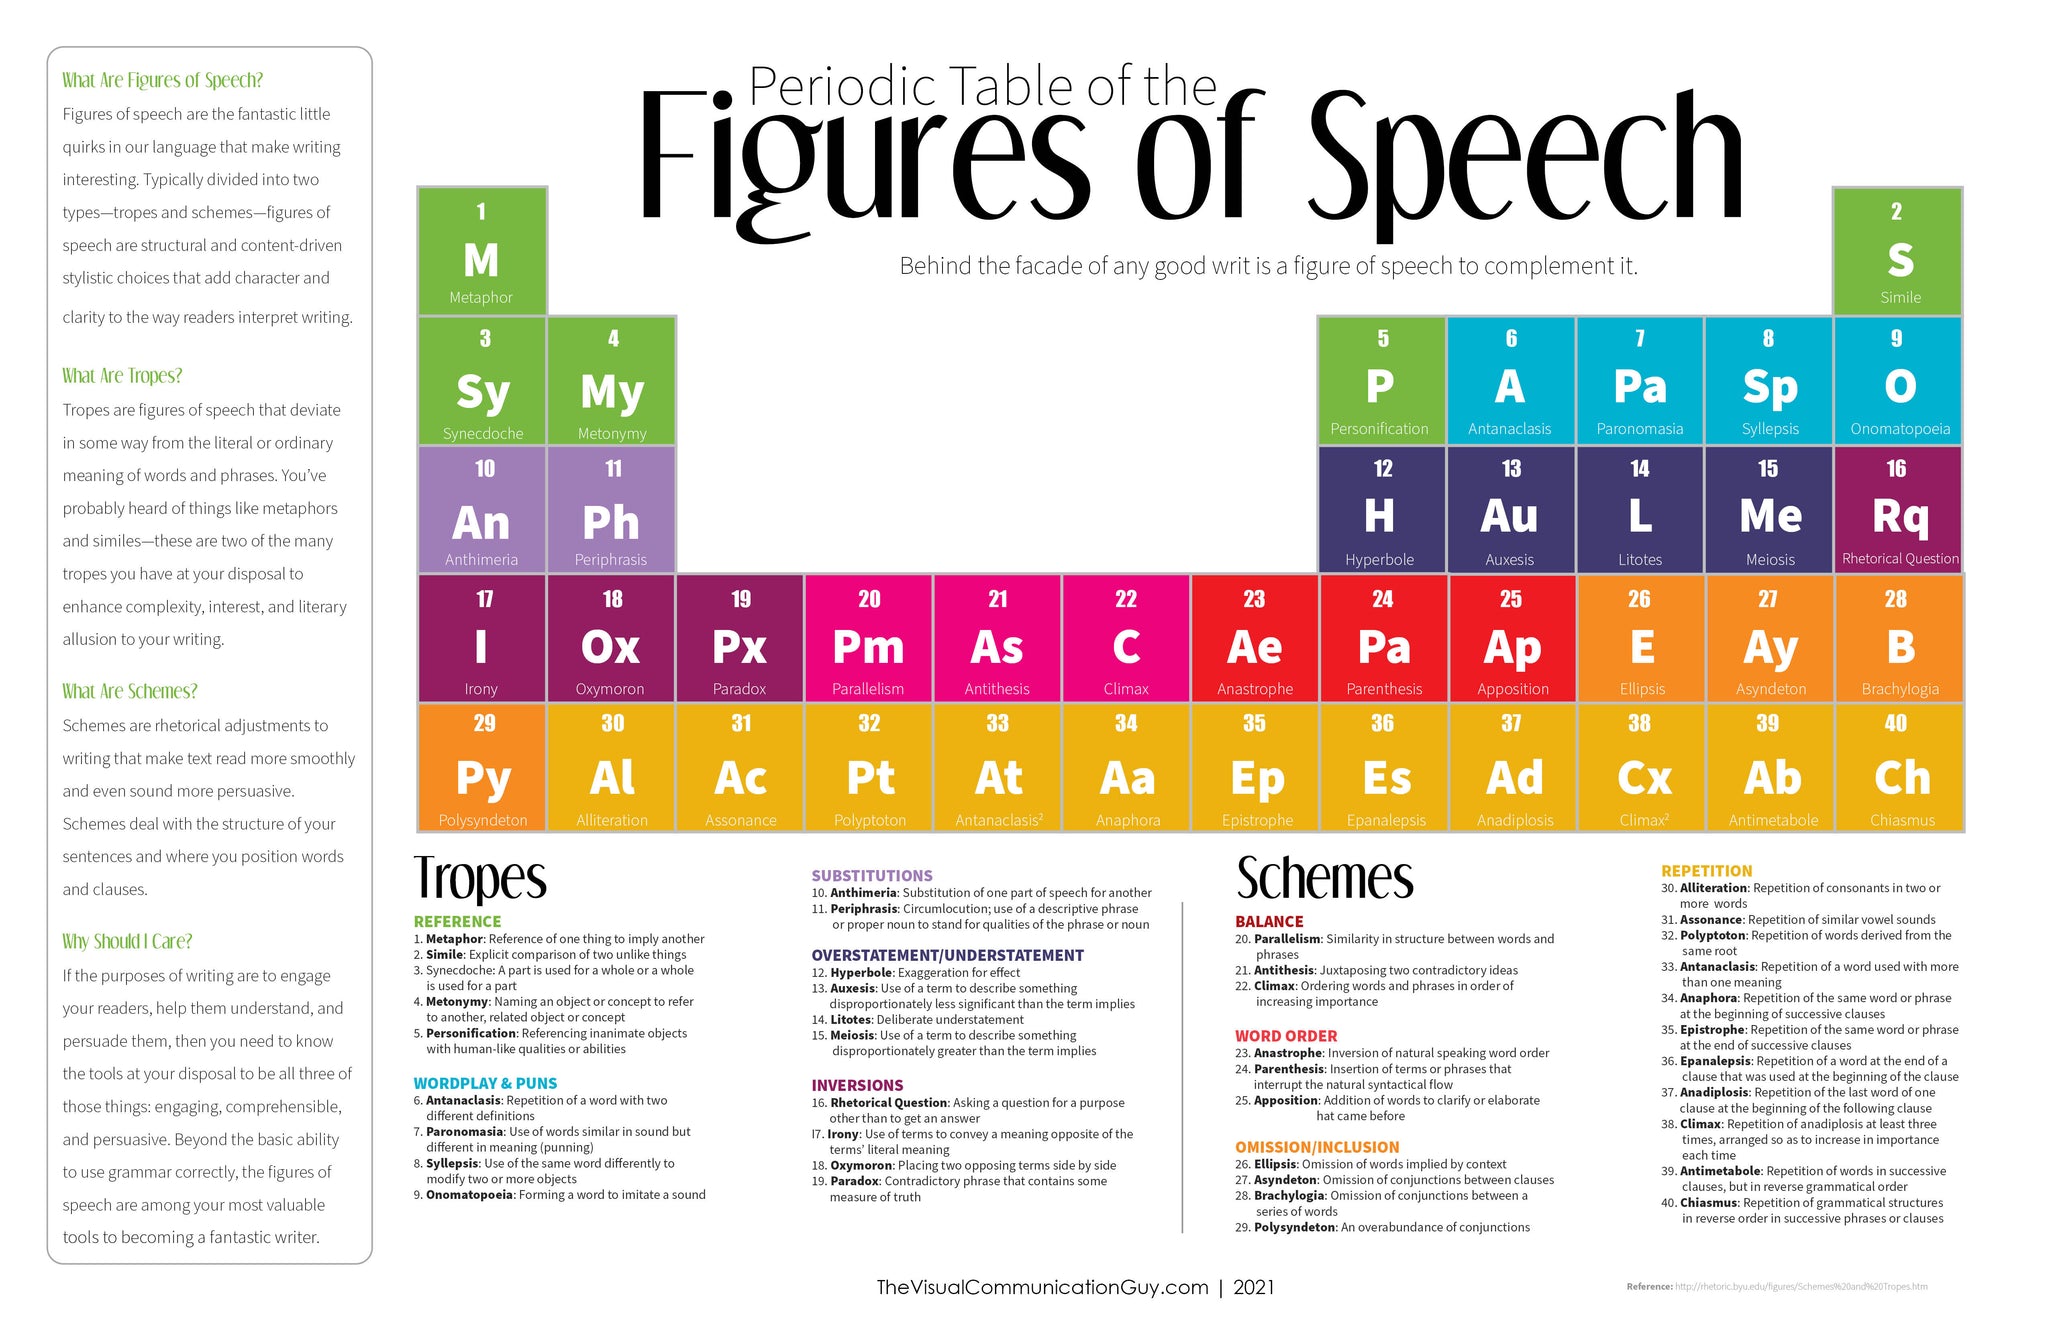 Periodic Table of the Figures of Speech 19x28.5 Poster Print